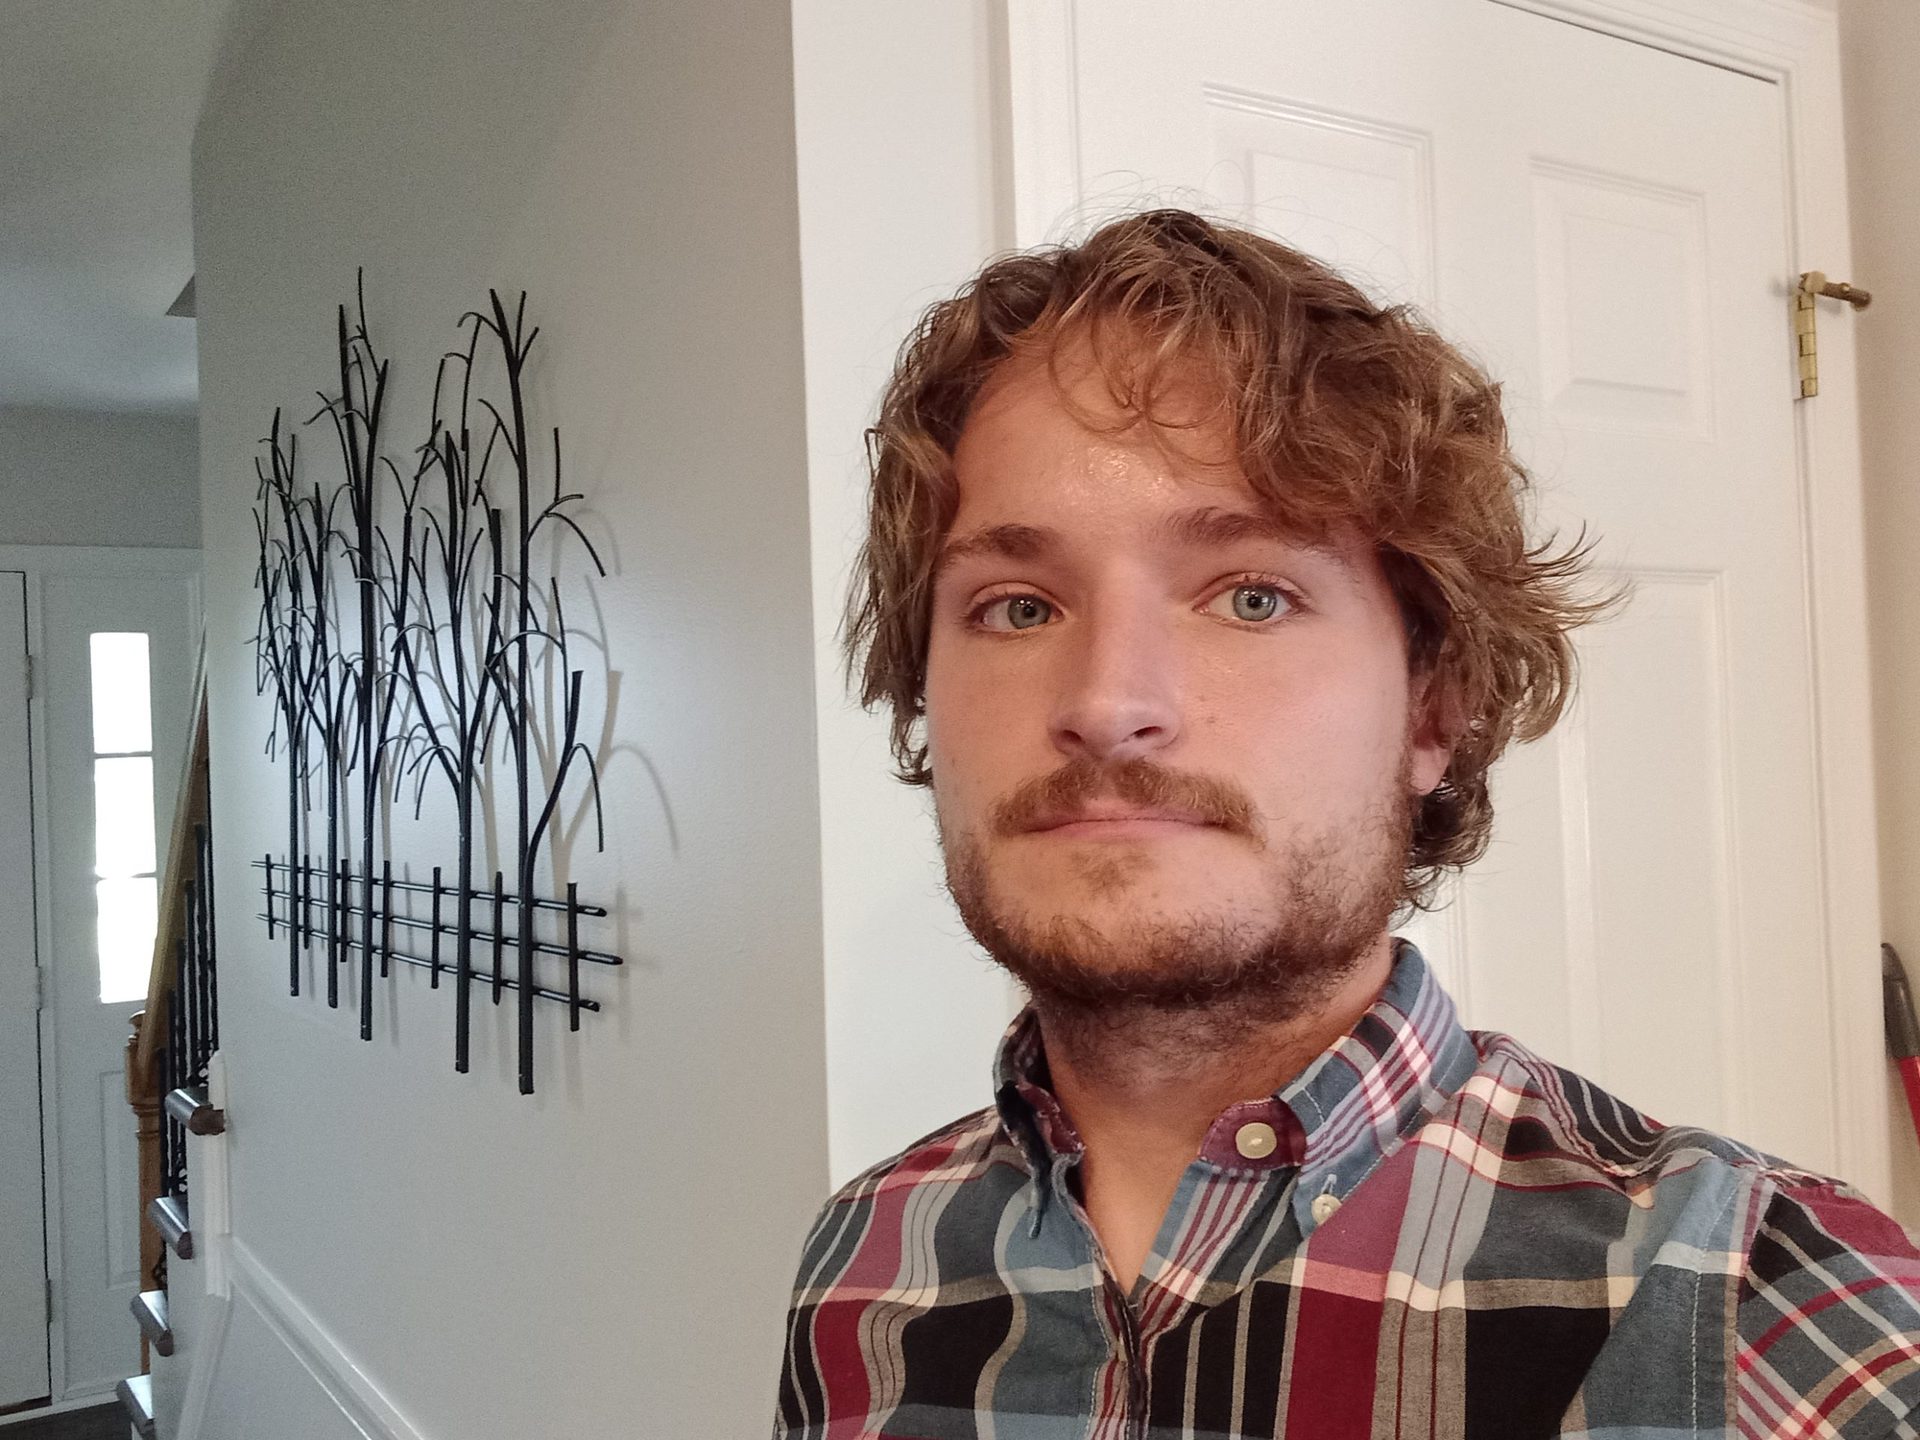 Galaxy A12 standard selfie of a man with light hair and facial hair, wearing a red and black plaid shirt, taken indoors.